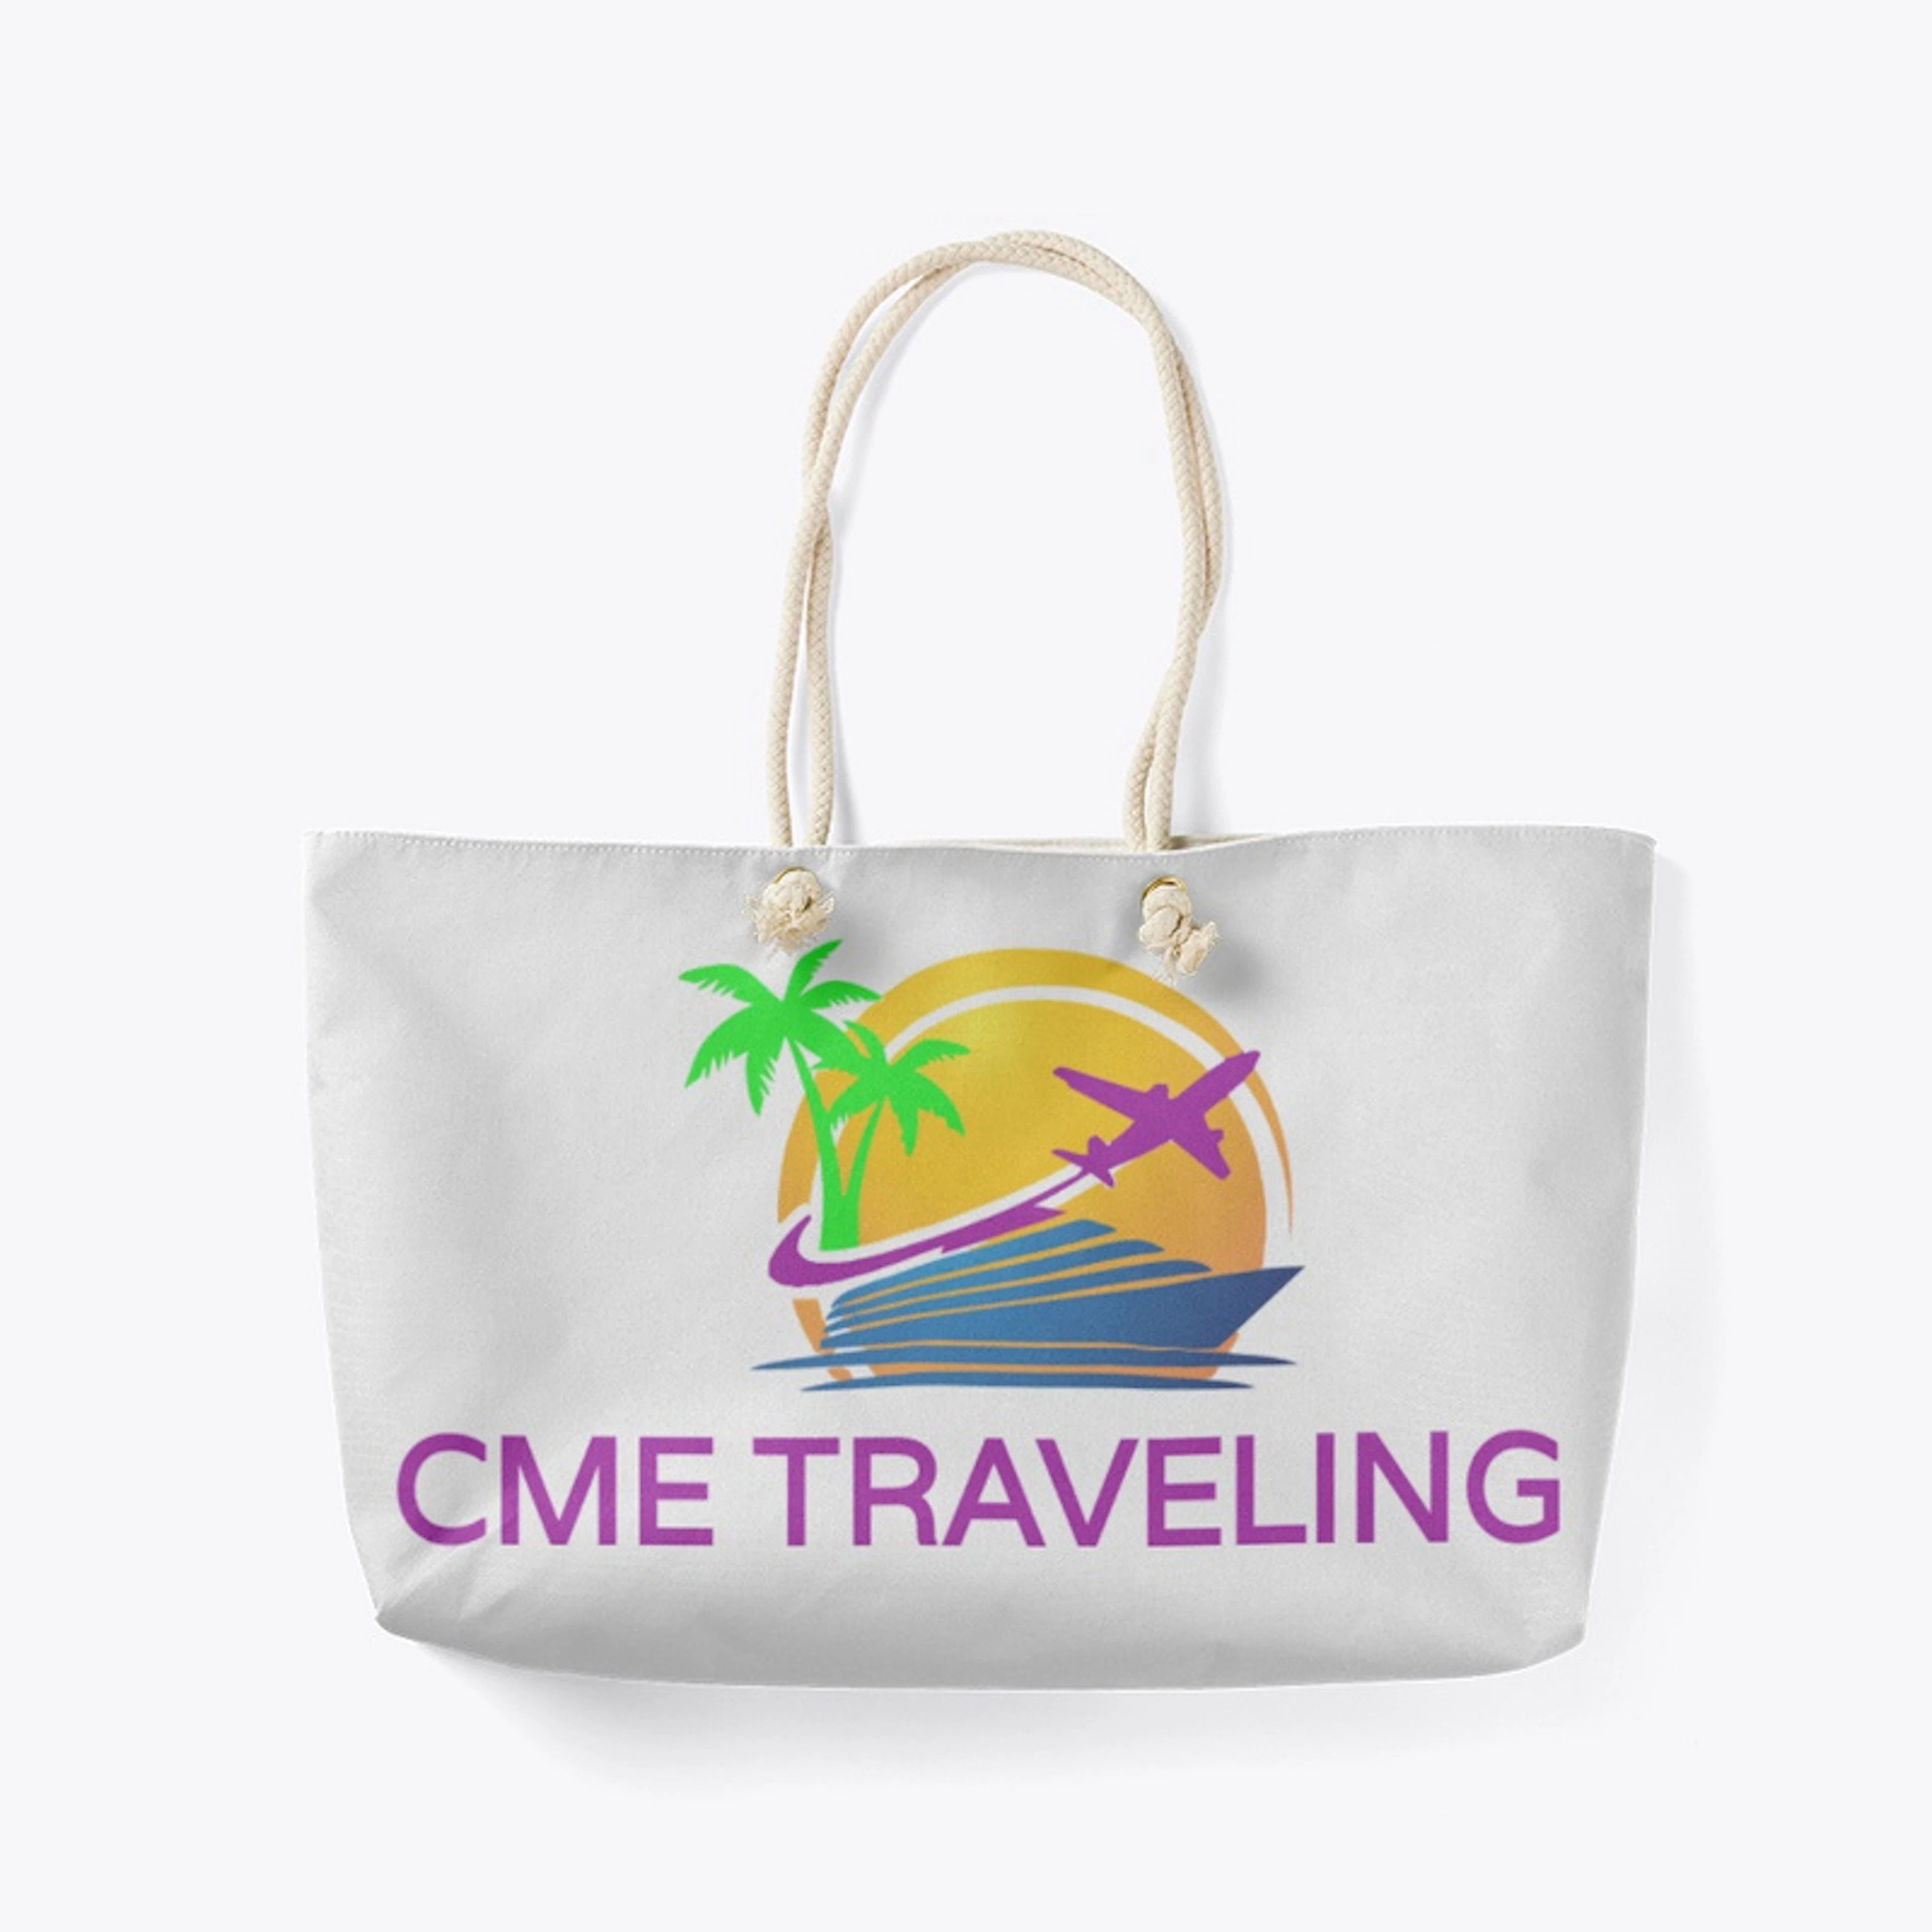 CME Traveling